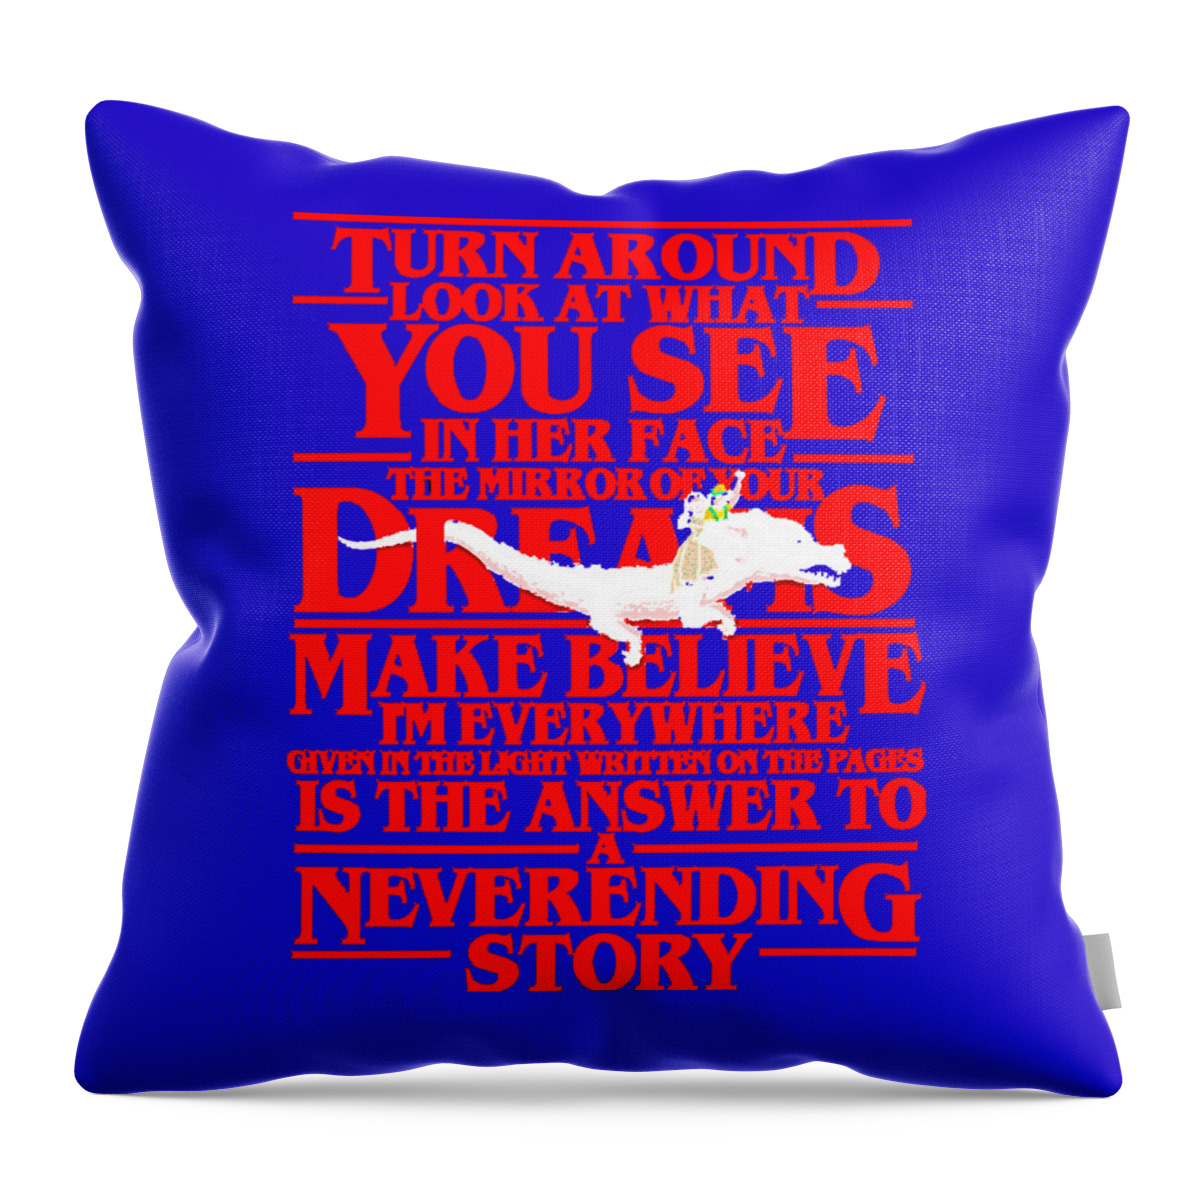 Neverending Story Throw Pillow featuring the digital art Funny Man The Answer To A Neverending Story Awesome For Music Fans by Mizorey Tee